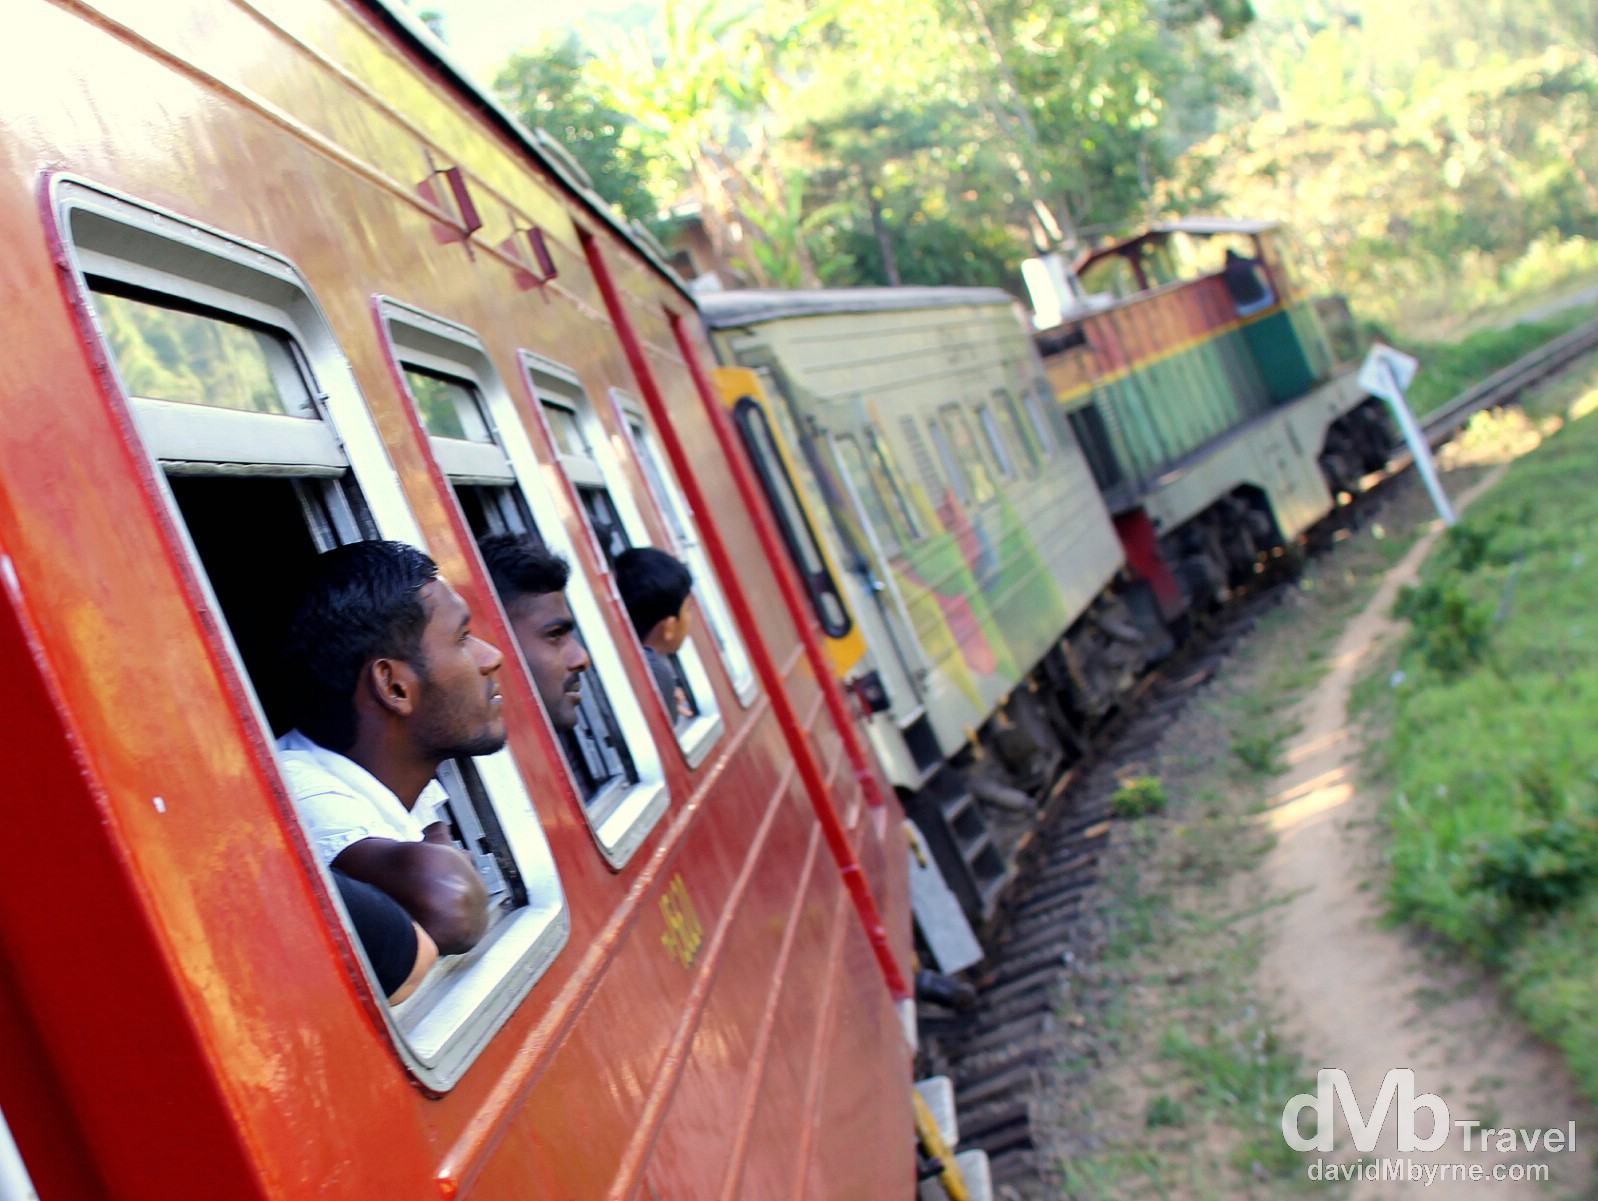 Taking in the views from the Badulla to Colombo train in central Sri Lanka. September 5th 2012.